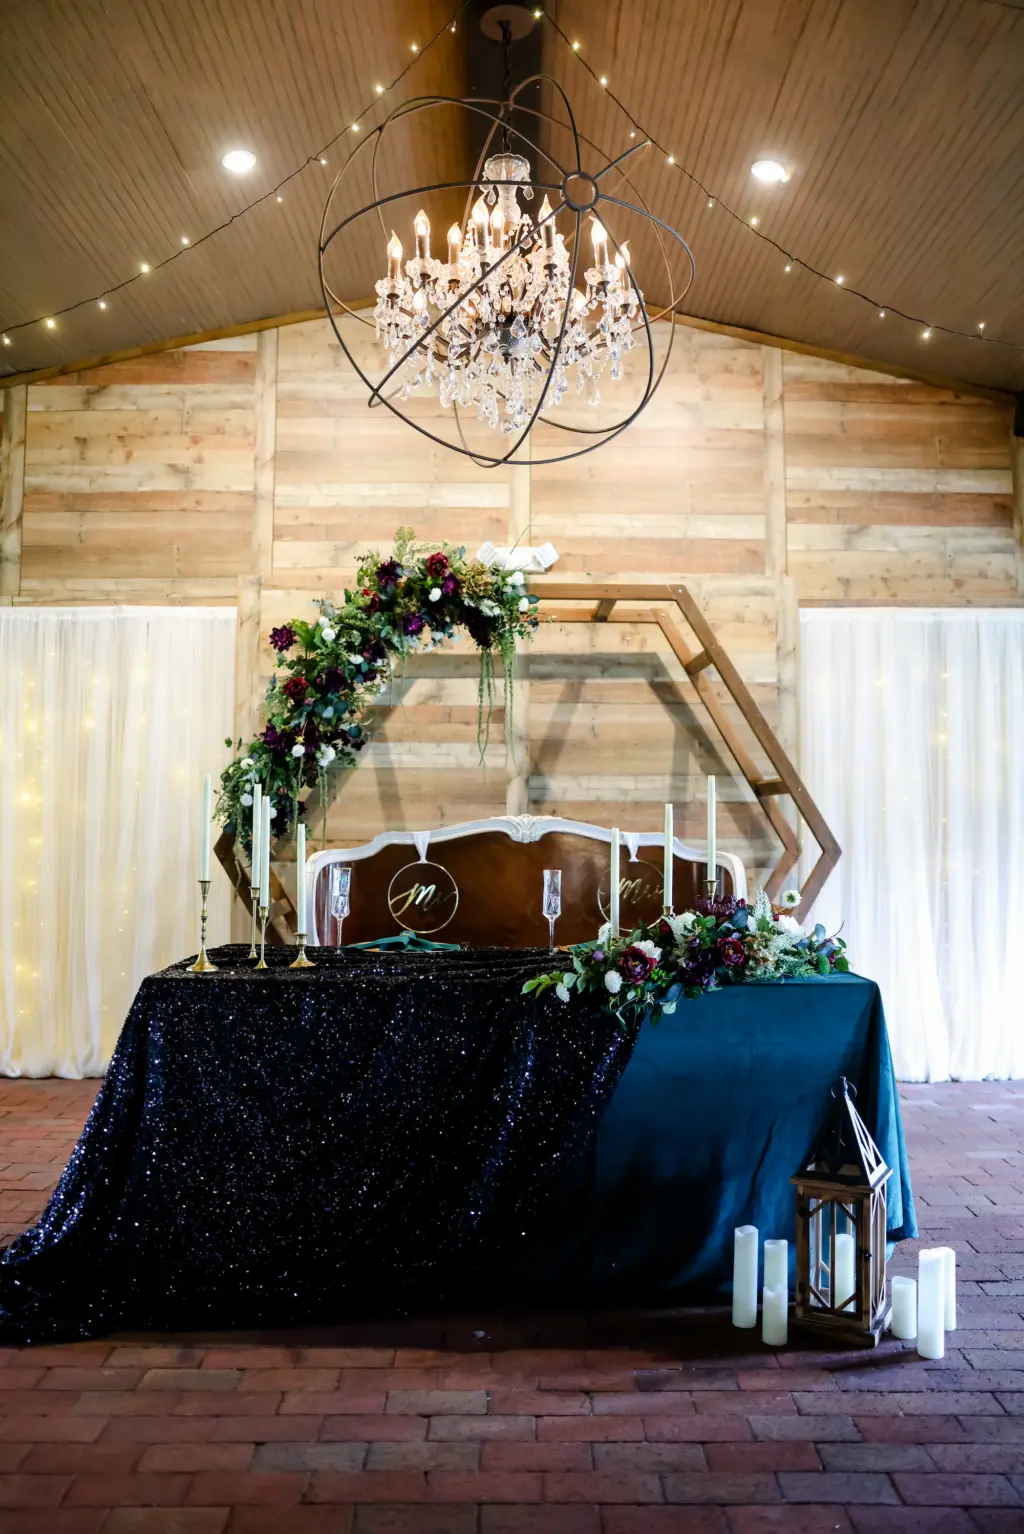 Emerald Green Rustic Wedding Reception Inspiration | Hexagon Wooden Arch Backdrop for Sweetheart Table